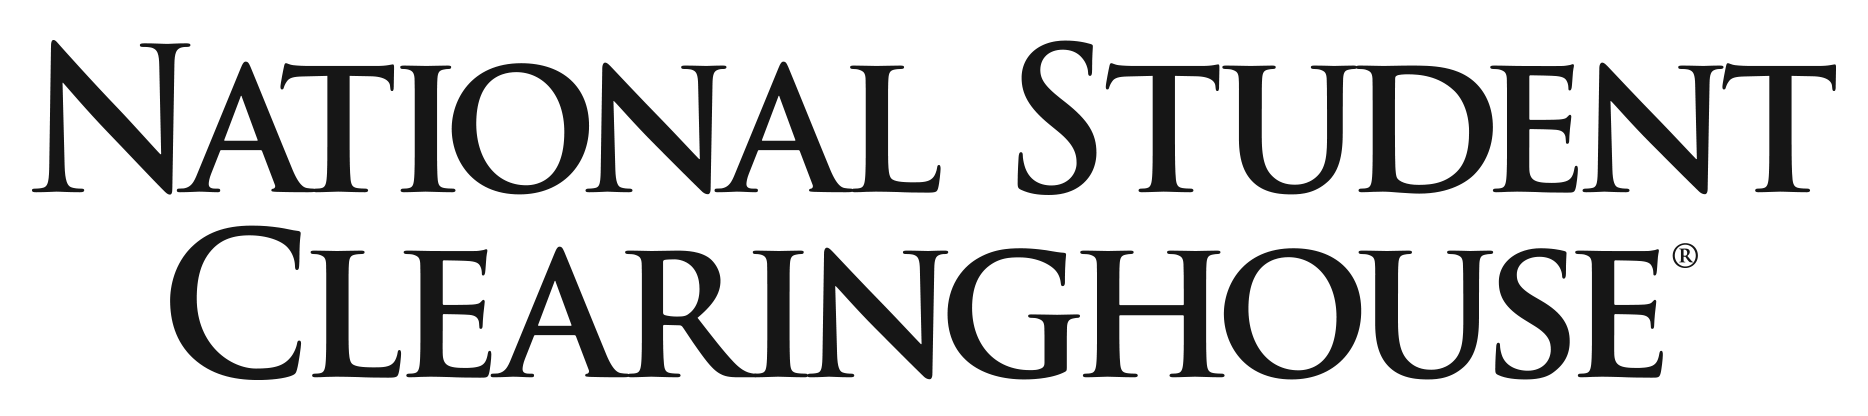 National Student Clearinghouse Logo.png